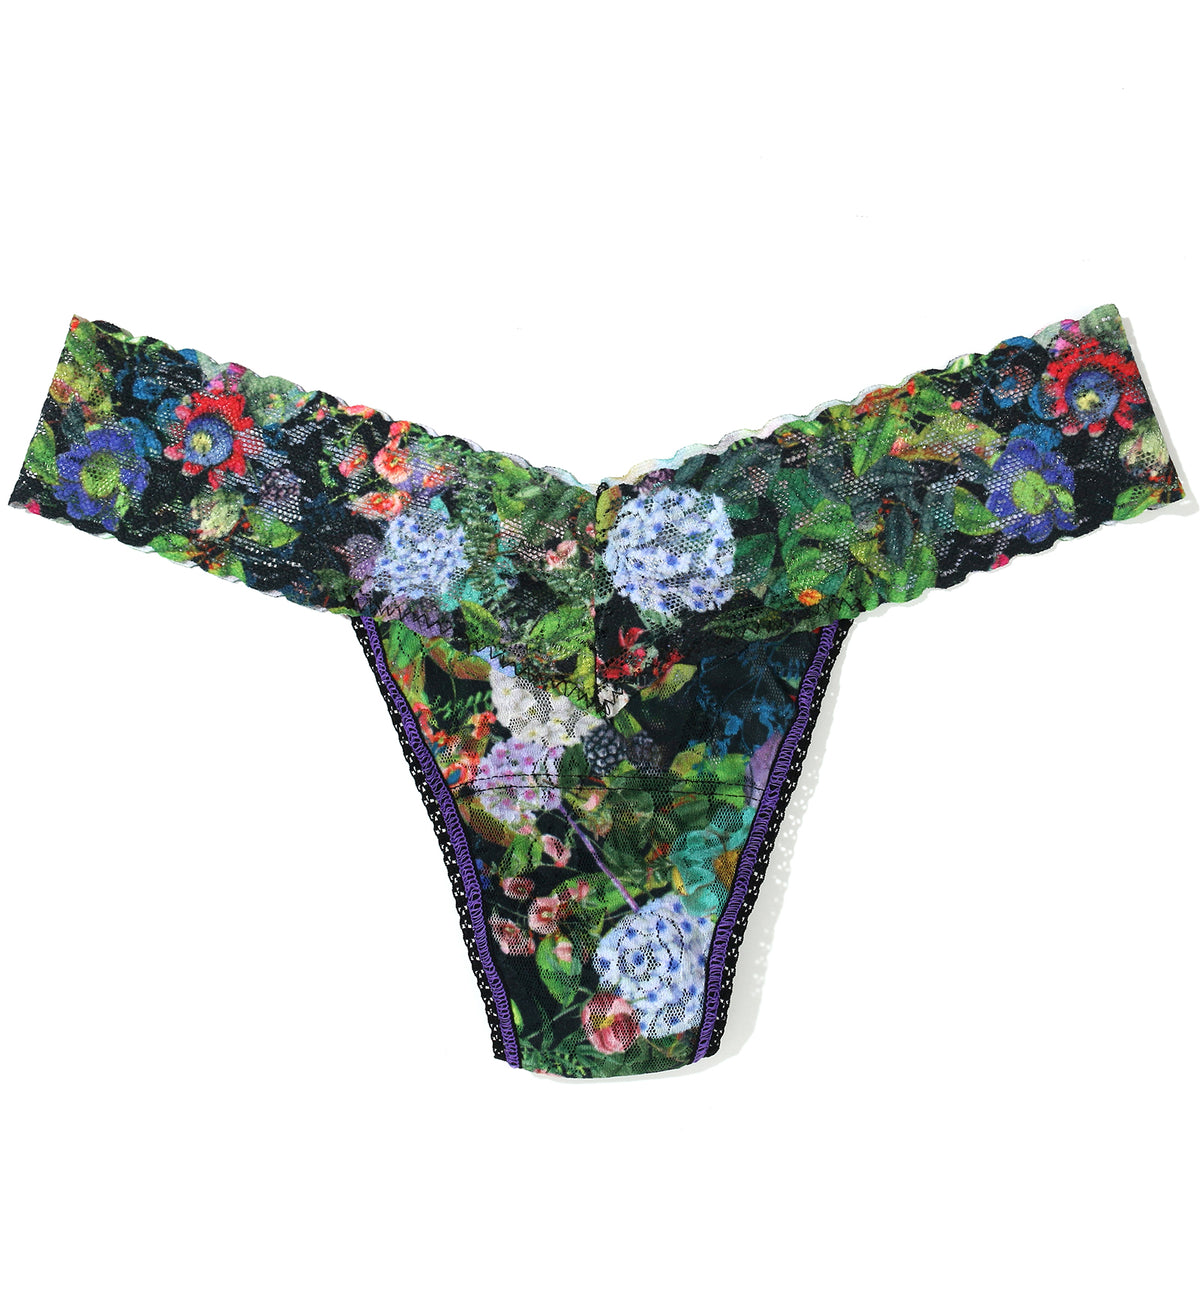 Hanky Panky Signature Lace Printed Low Rise Thong (PR4911P),Voices on the Veranda - Voices on the Veranda,One Size